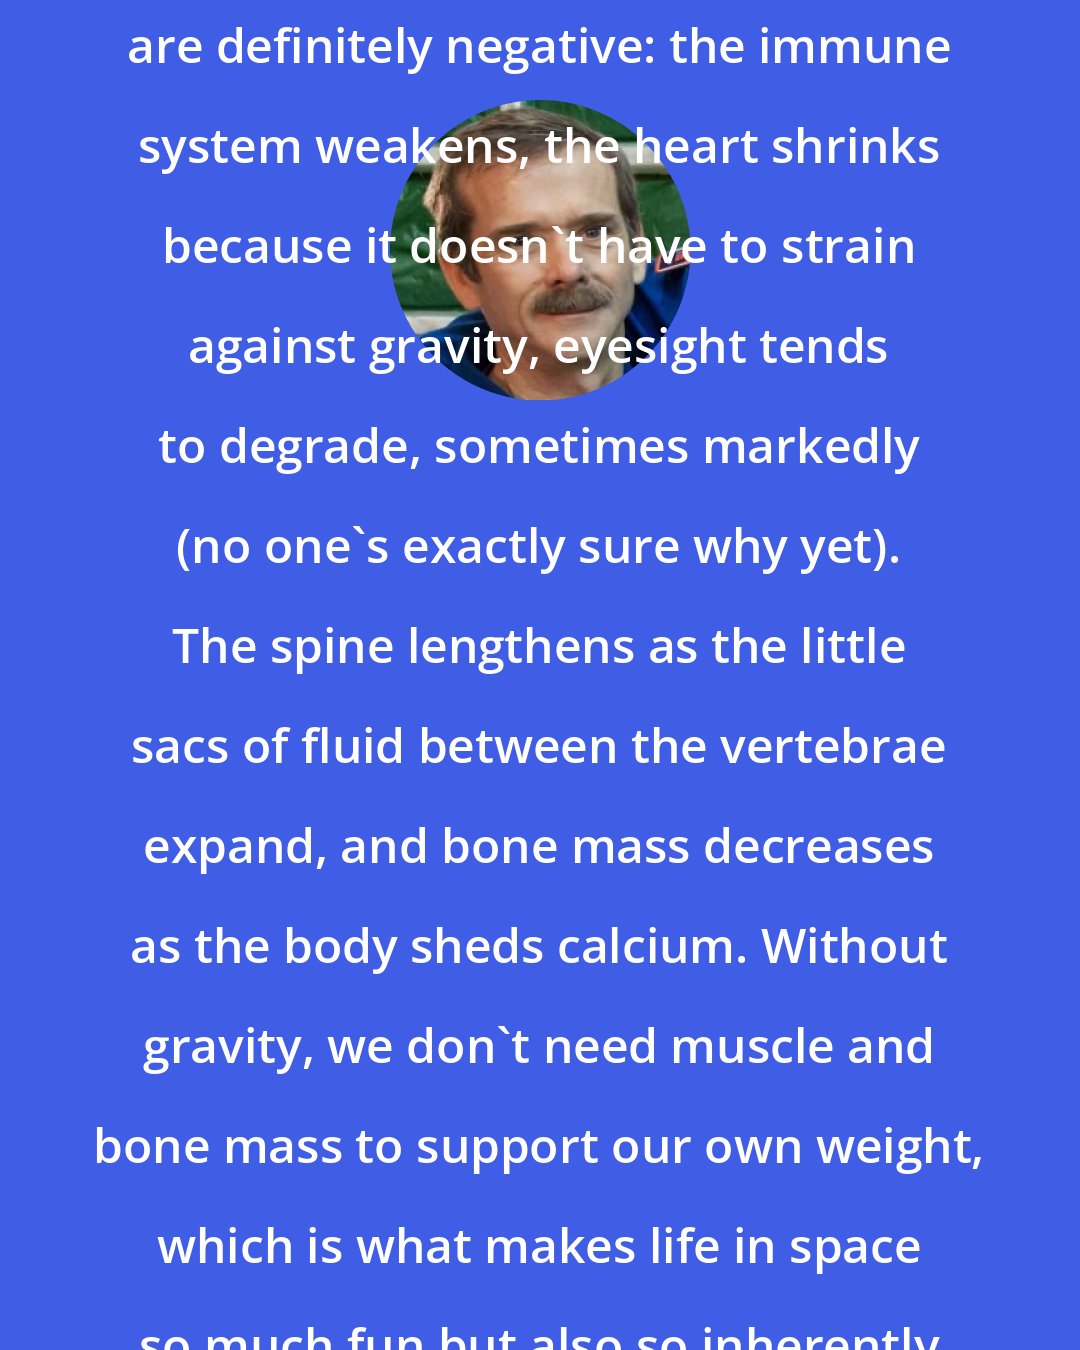 Chris Hadfield: Other anatomical changes associated with long-duration space flight are definitely negative: the immune system weakens, the heart shrinks because it doesn't have to strain against gravity, eyesight tends to degrade, sometimes markedly (no one's exactly sure why yet). The spine lengthens as the little sacs of fluid between the vertebrae expand, and bone mass decreases as the body sheds calcium. Without gravity, we don't need muscle and bone mass to support our own weight, which is what makes life in space so much fun but also so inherently bad for the human body, long-term.